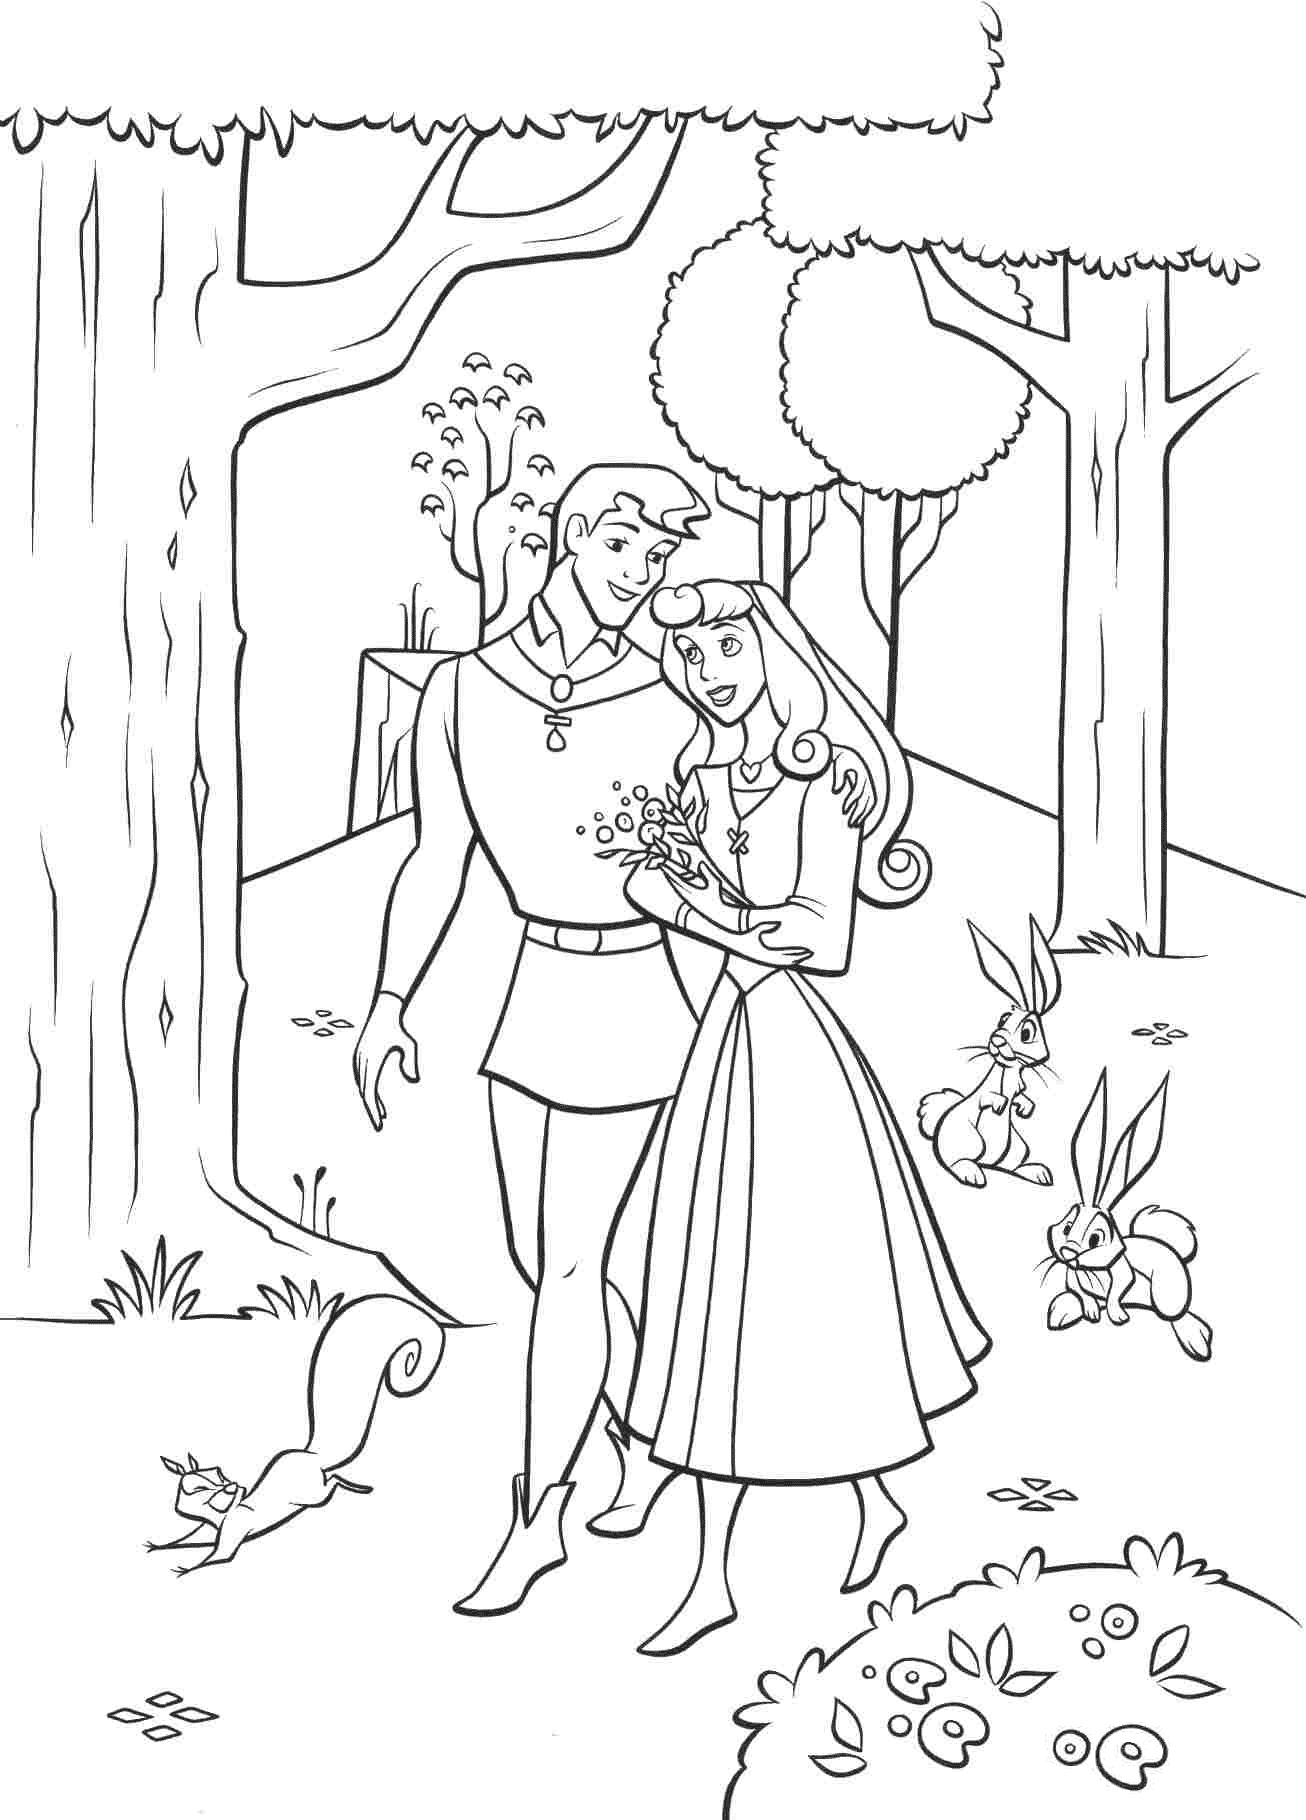 Phillip and Aurora are Falling in Love Coloring Pages